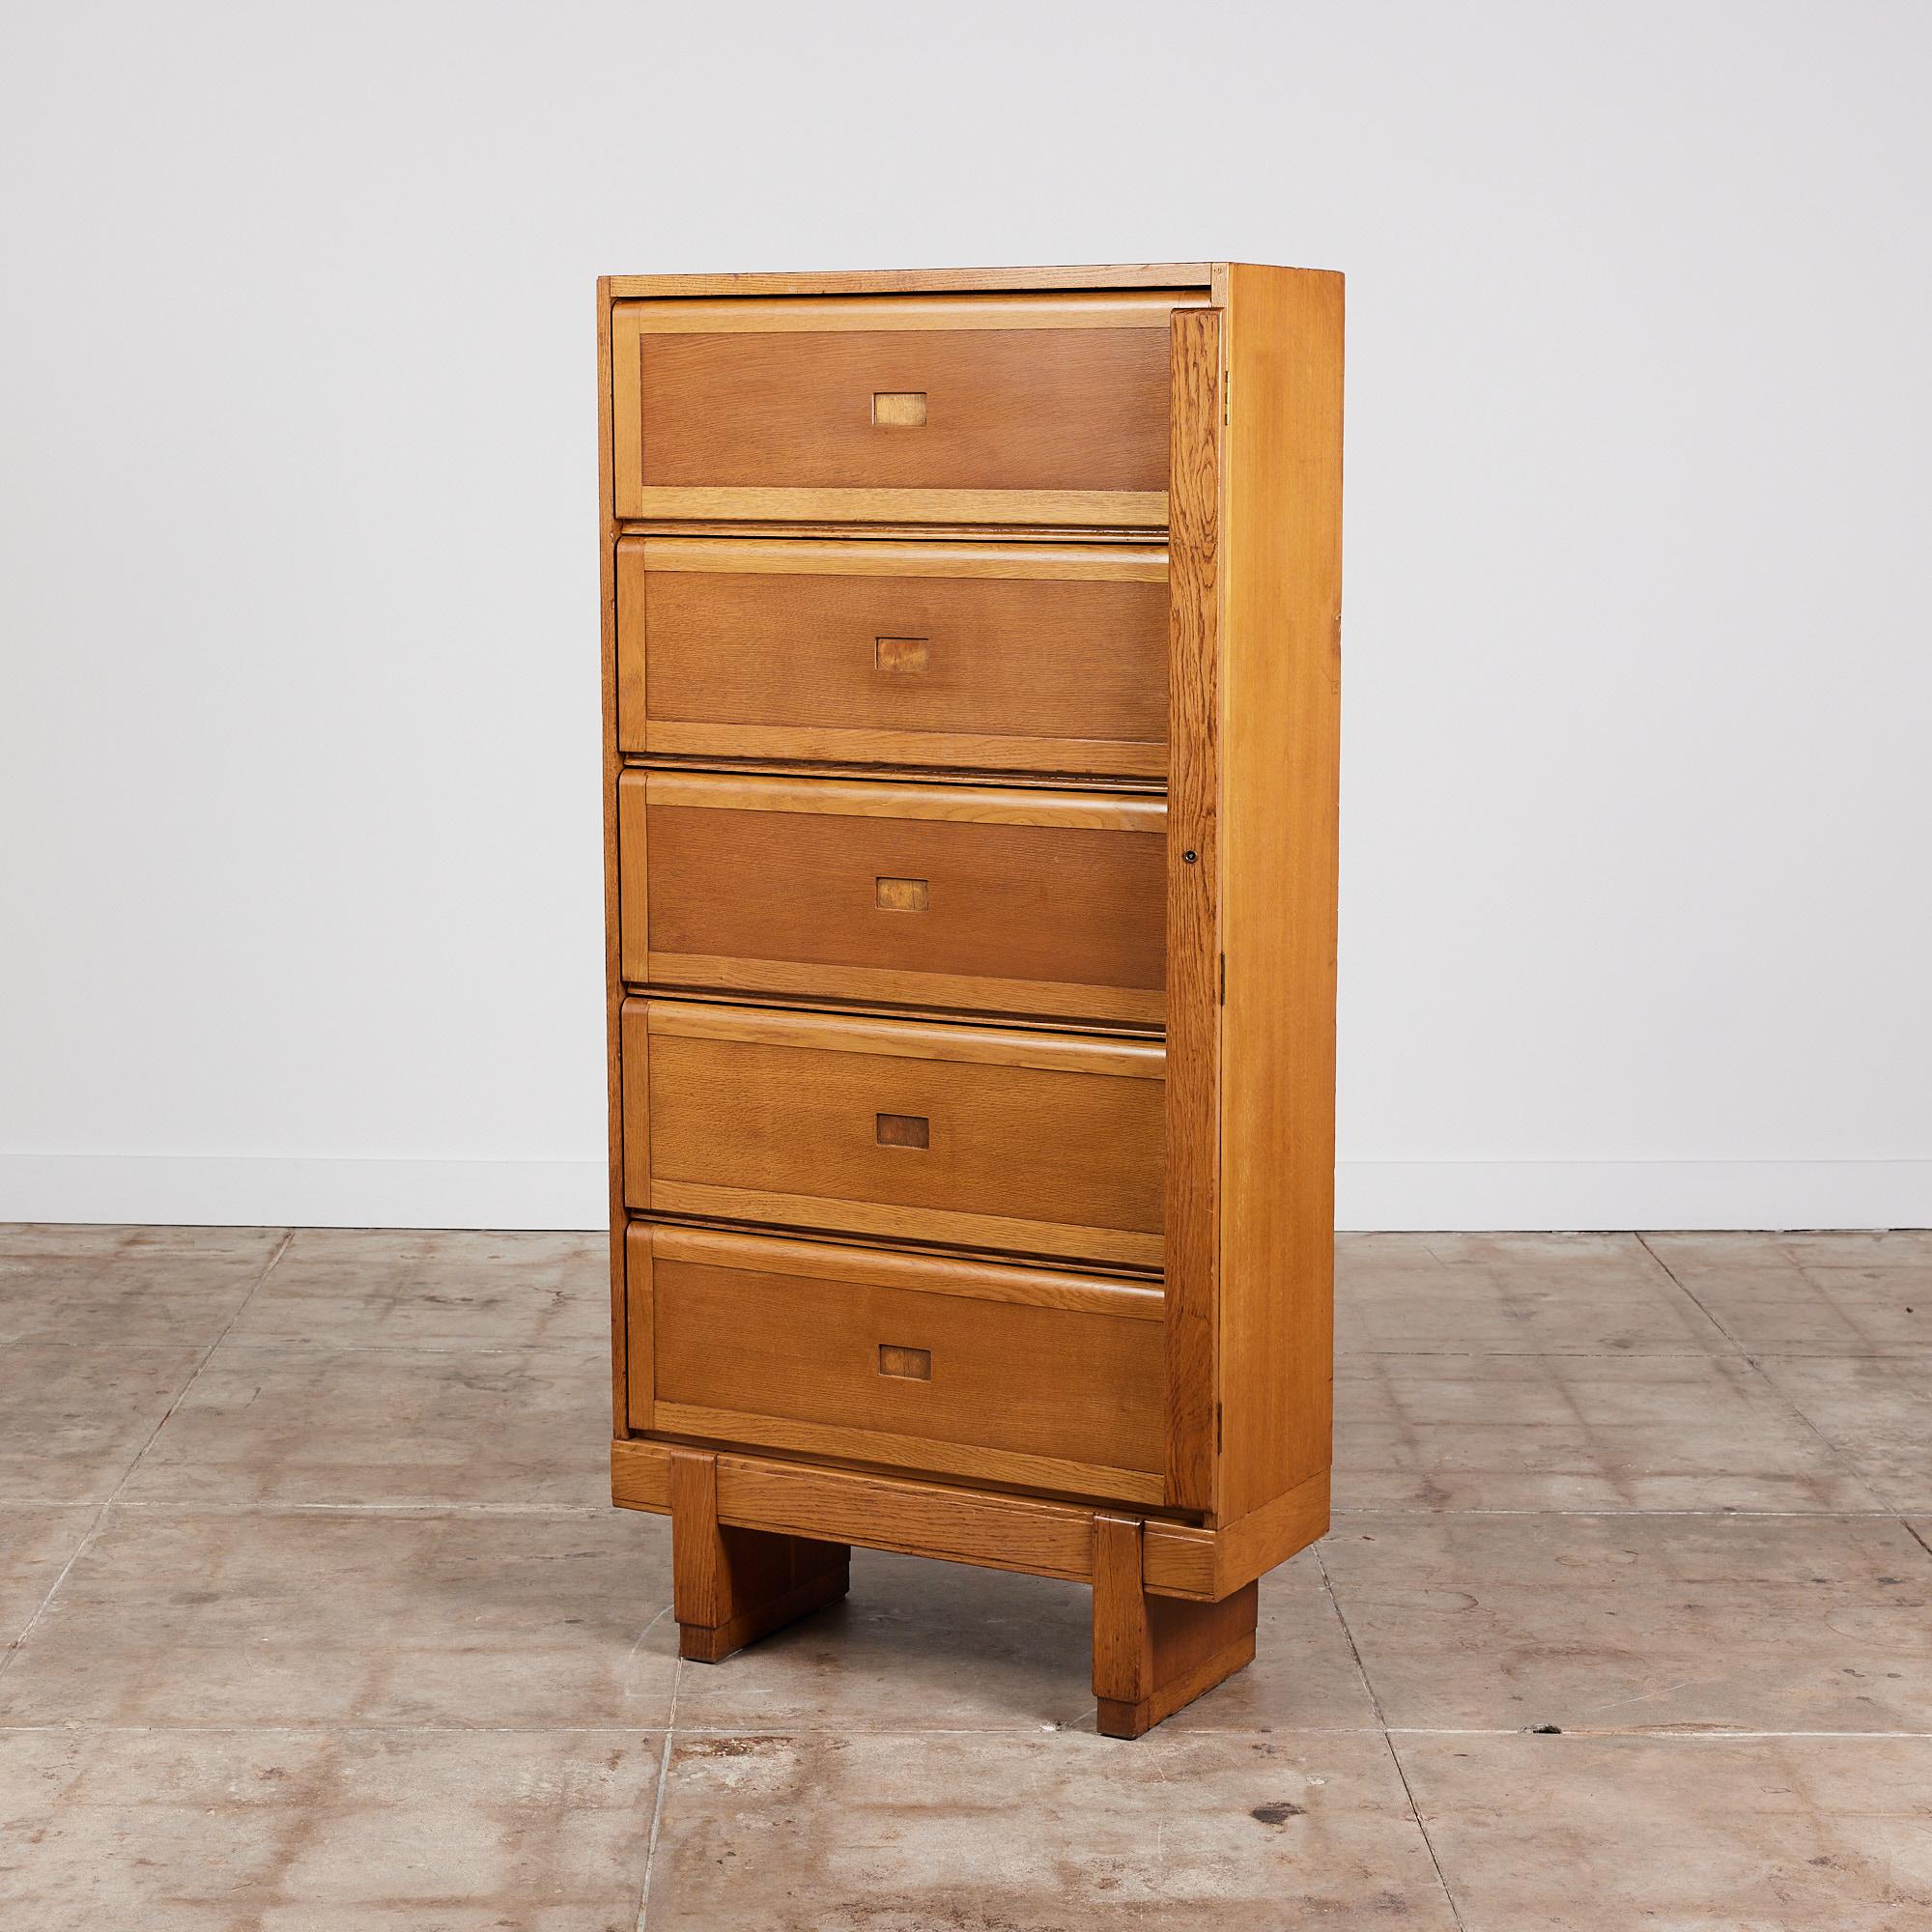 Oak filing cabinet by ER Staverton, UK, c.1950s. The cabinet features a solid oak frame that sits atop chunky oak block legs. It has five vertically stacked hinged doors that flip up to reveal individual compartments separated by two narrow plywood